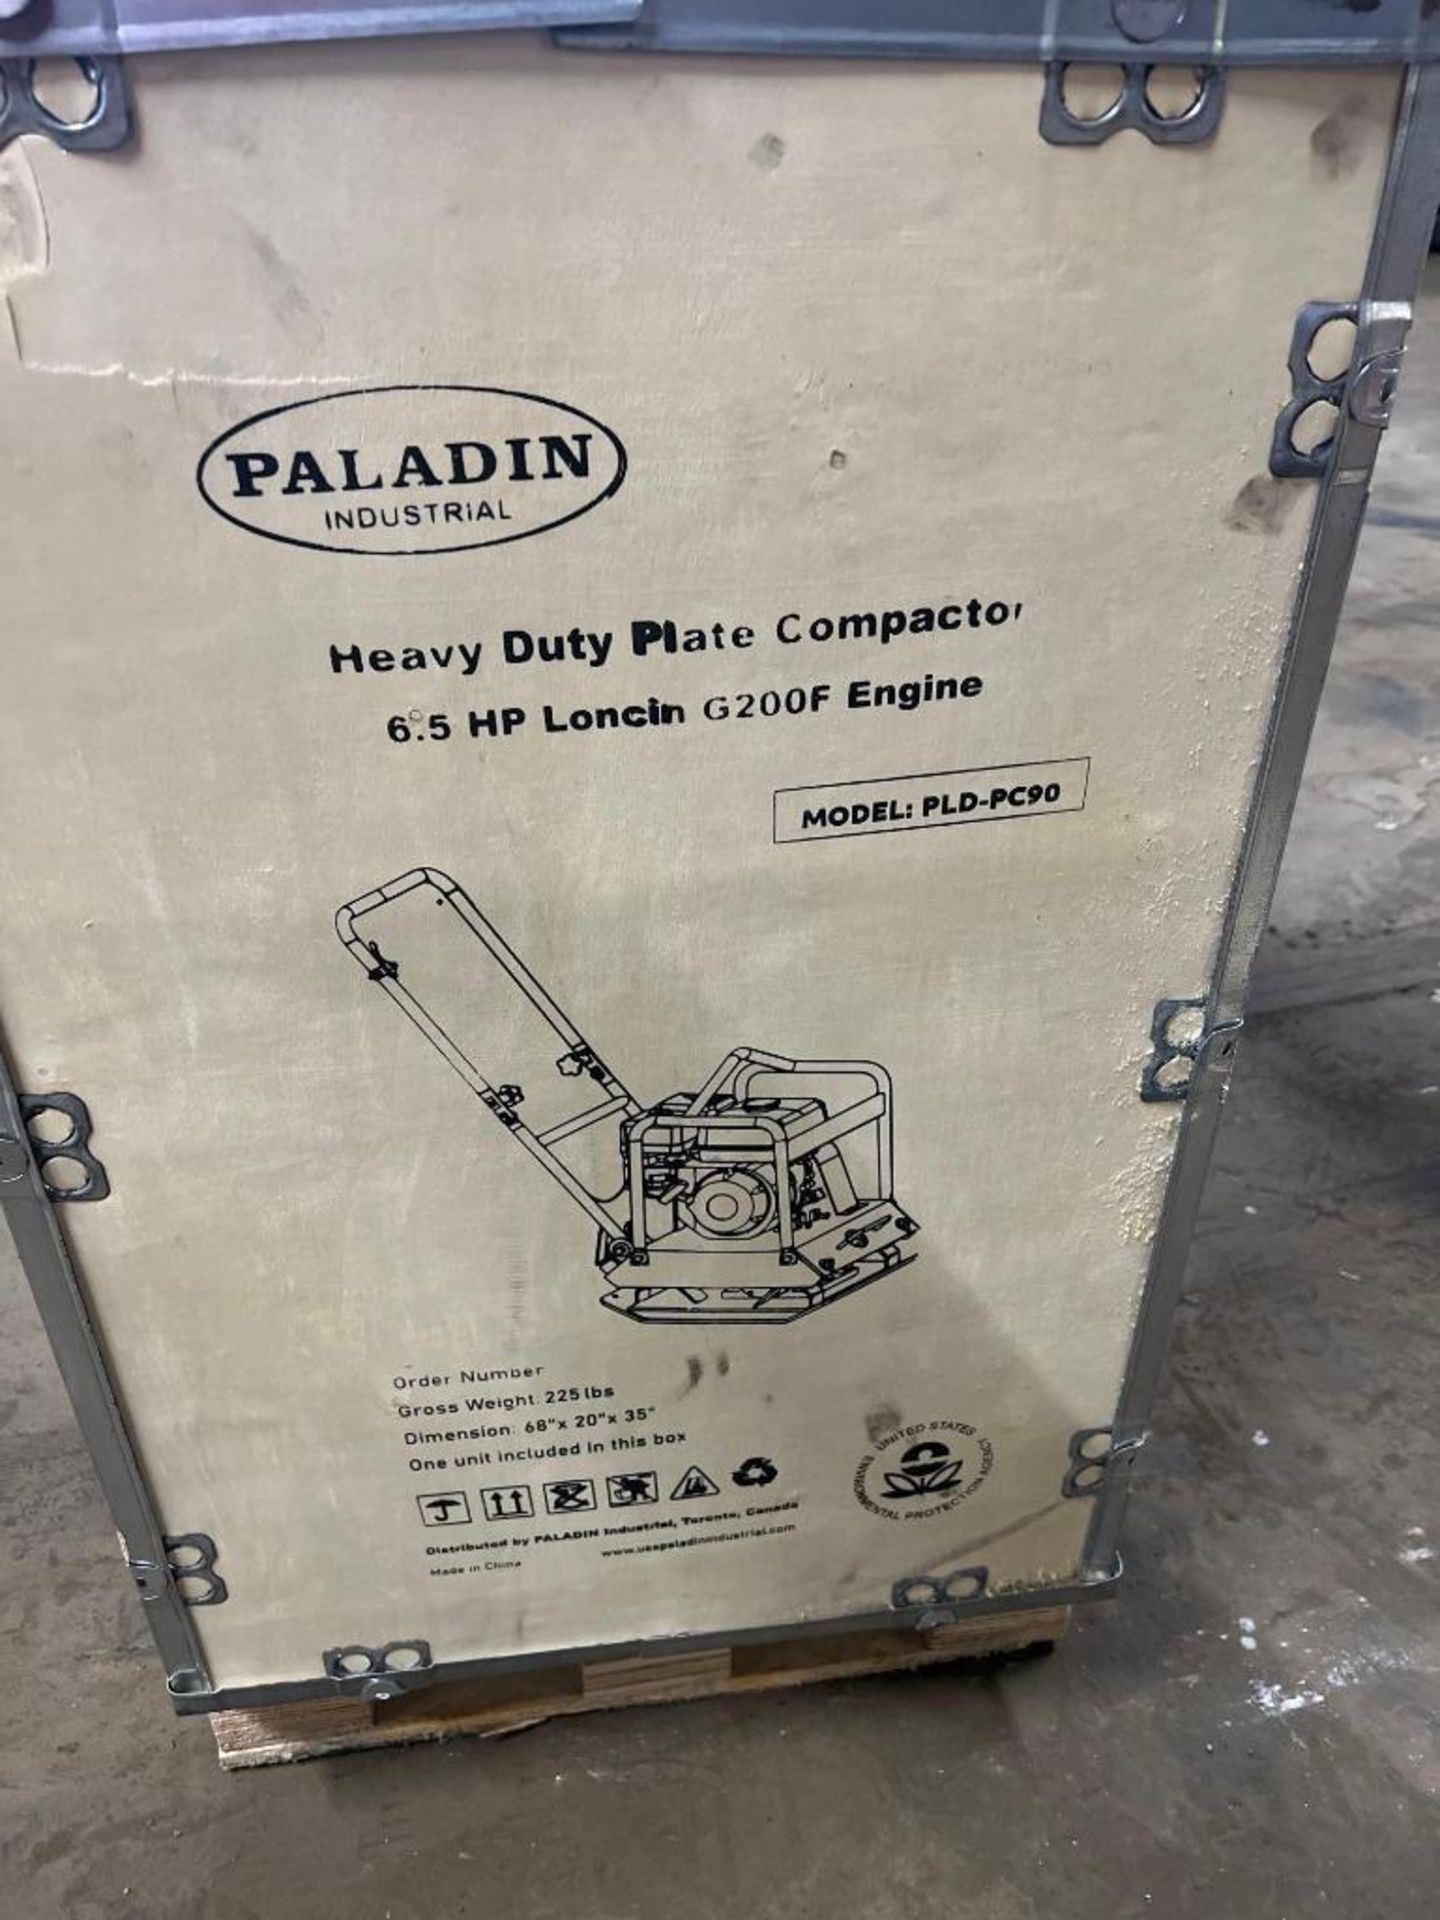 Paladin Co. Heavy Duty Plate Compactor - Image 2 of 2